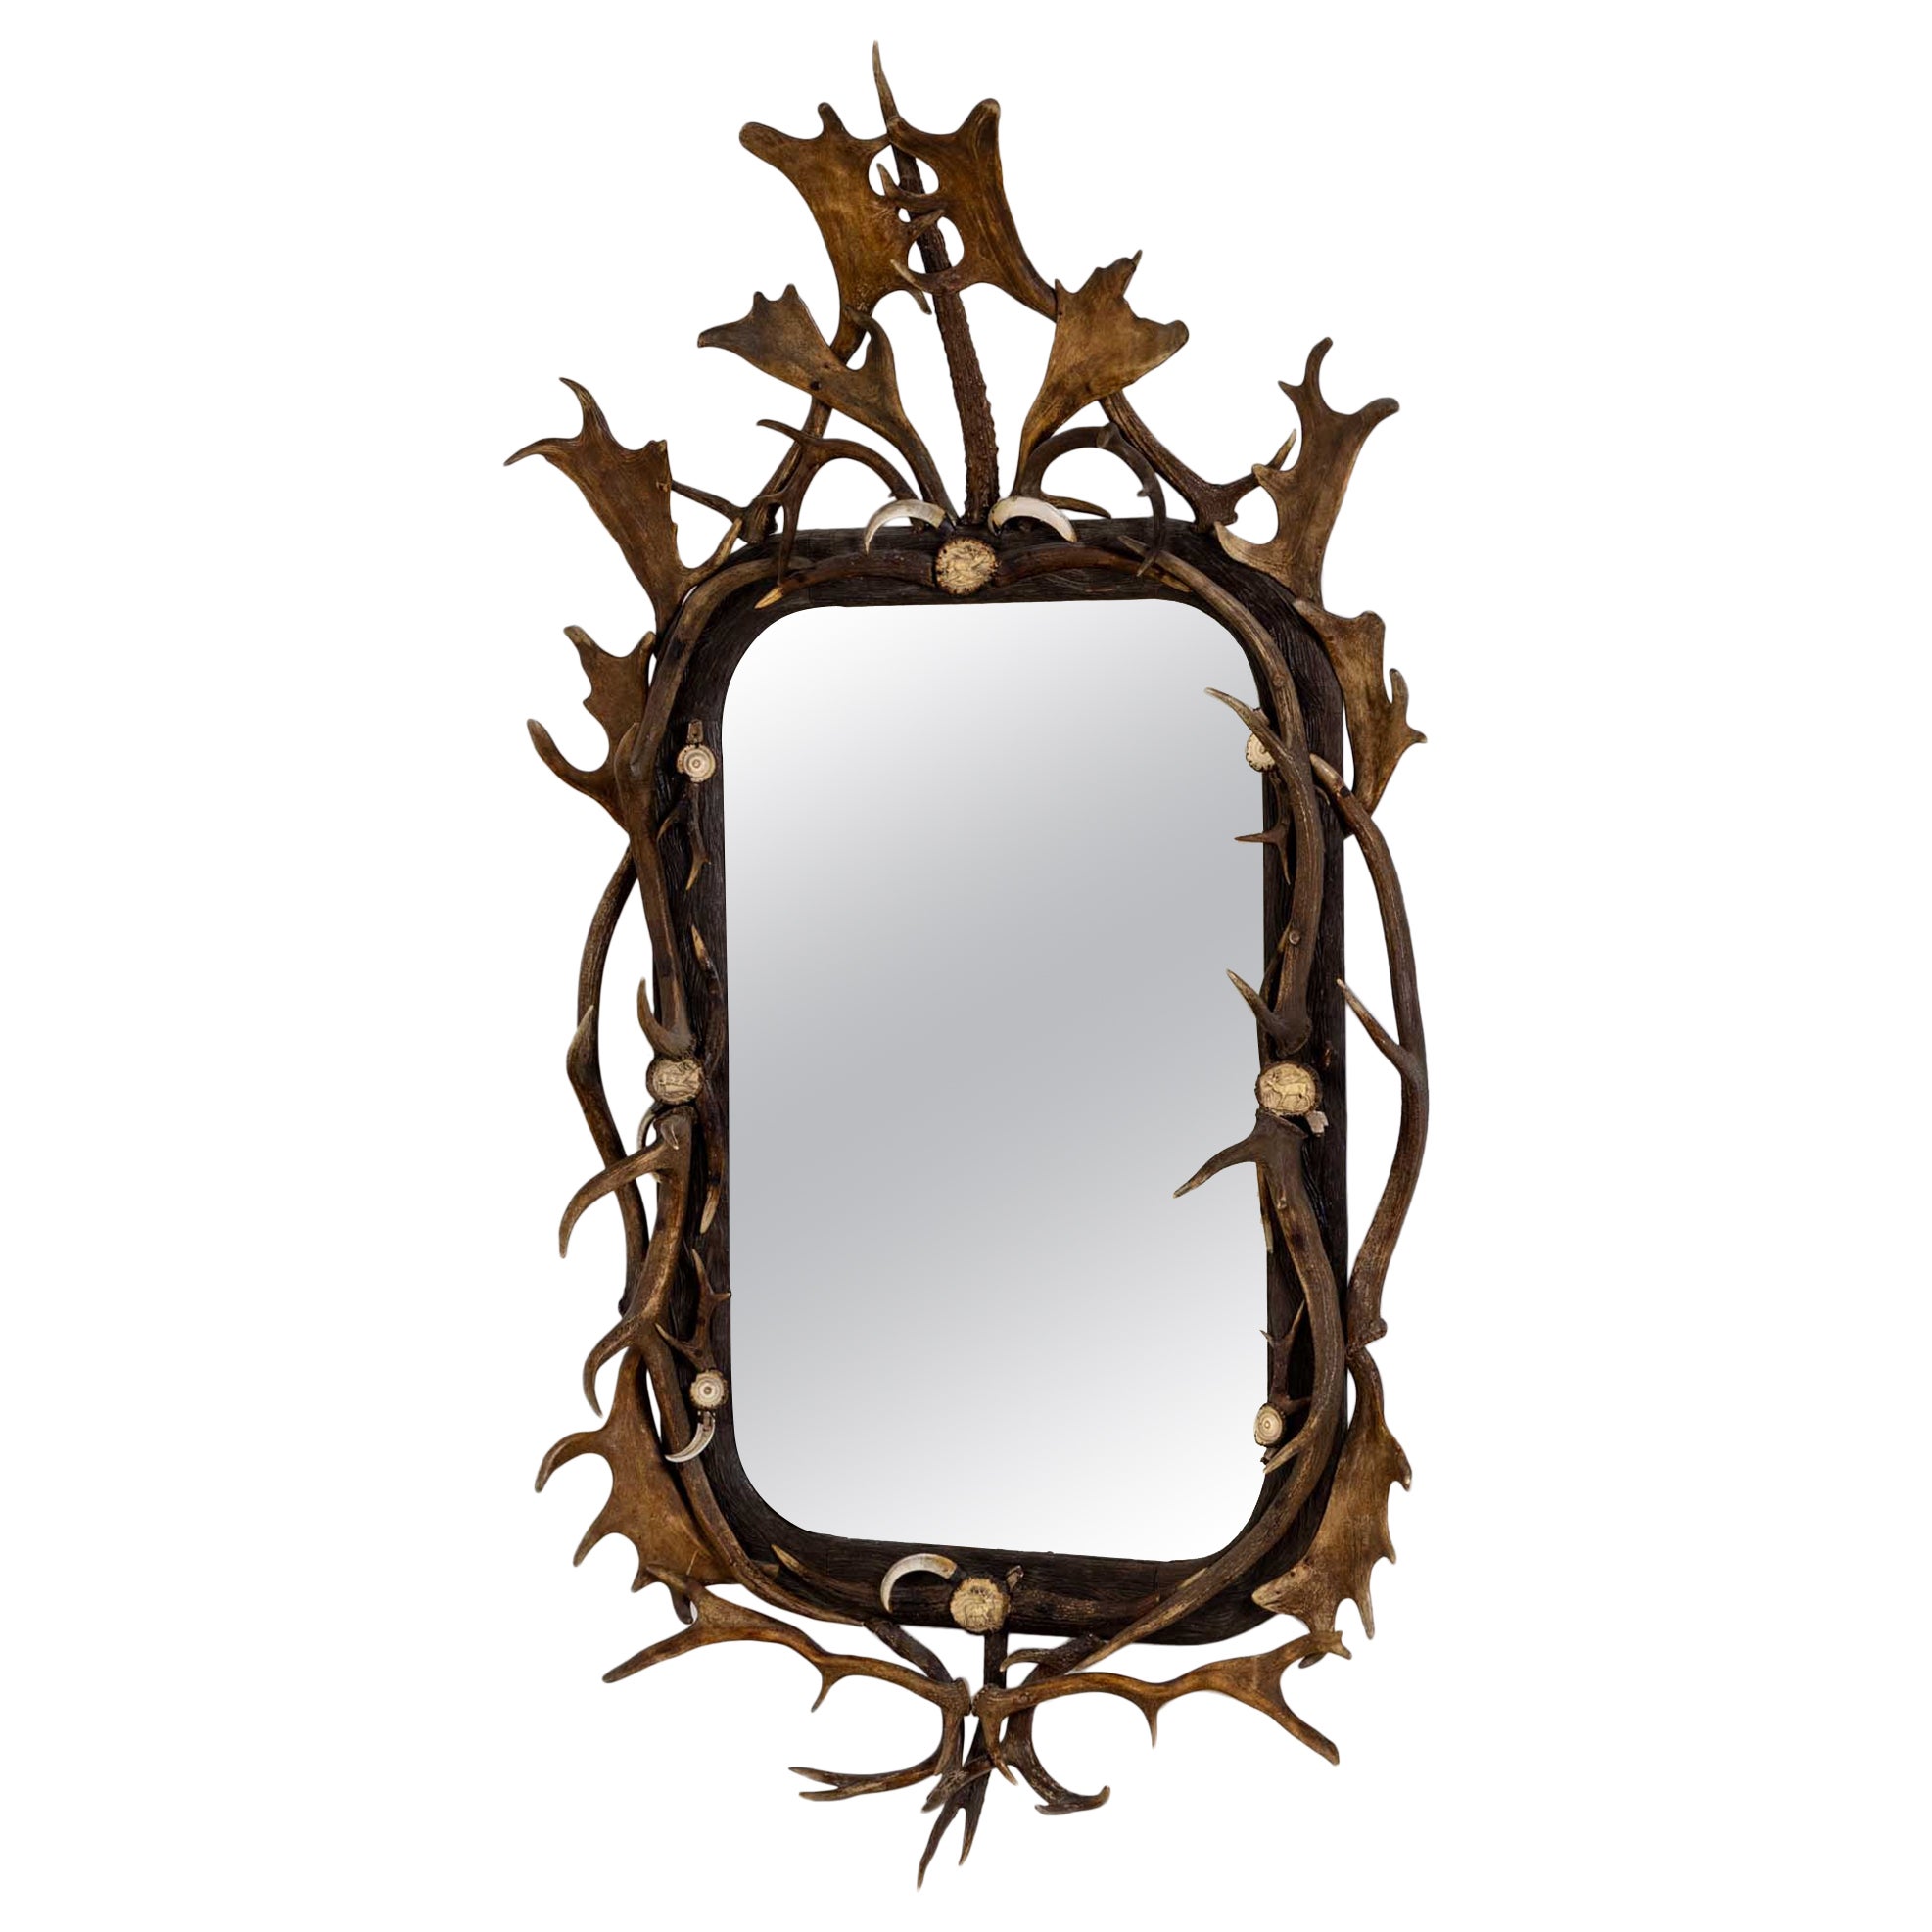 Wall Mirror with Stag Antlers, 2nd half 19th century